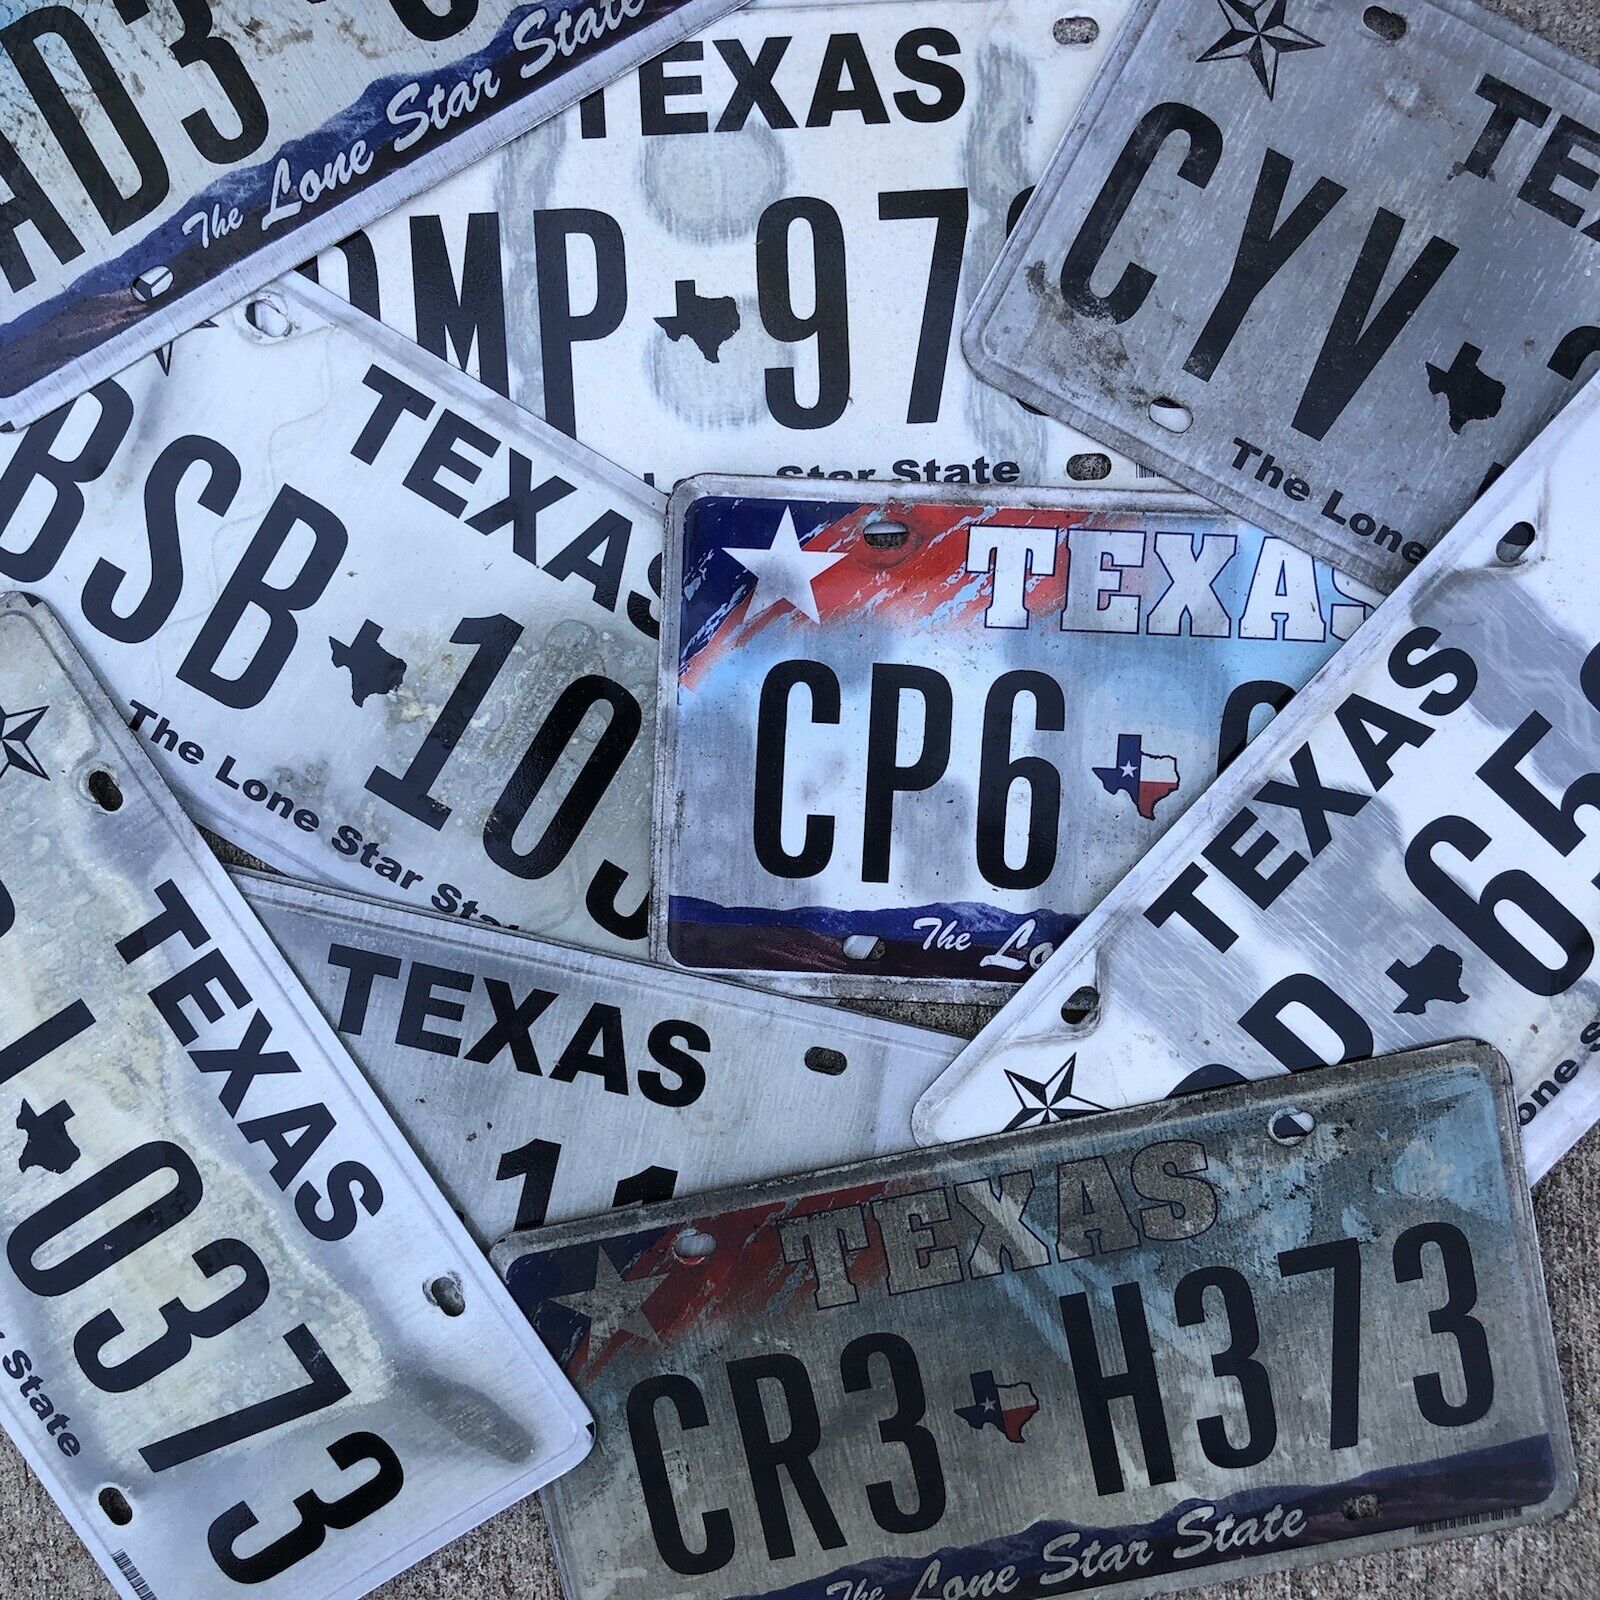 LOT OF 50 Collection MOST AWFUL (REALLY) Texas Flats License Plates USED/EXPIRED